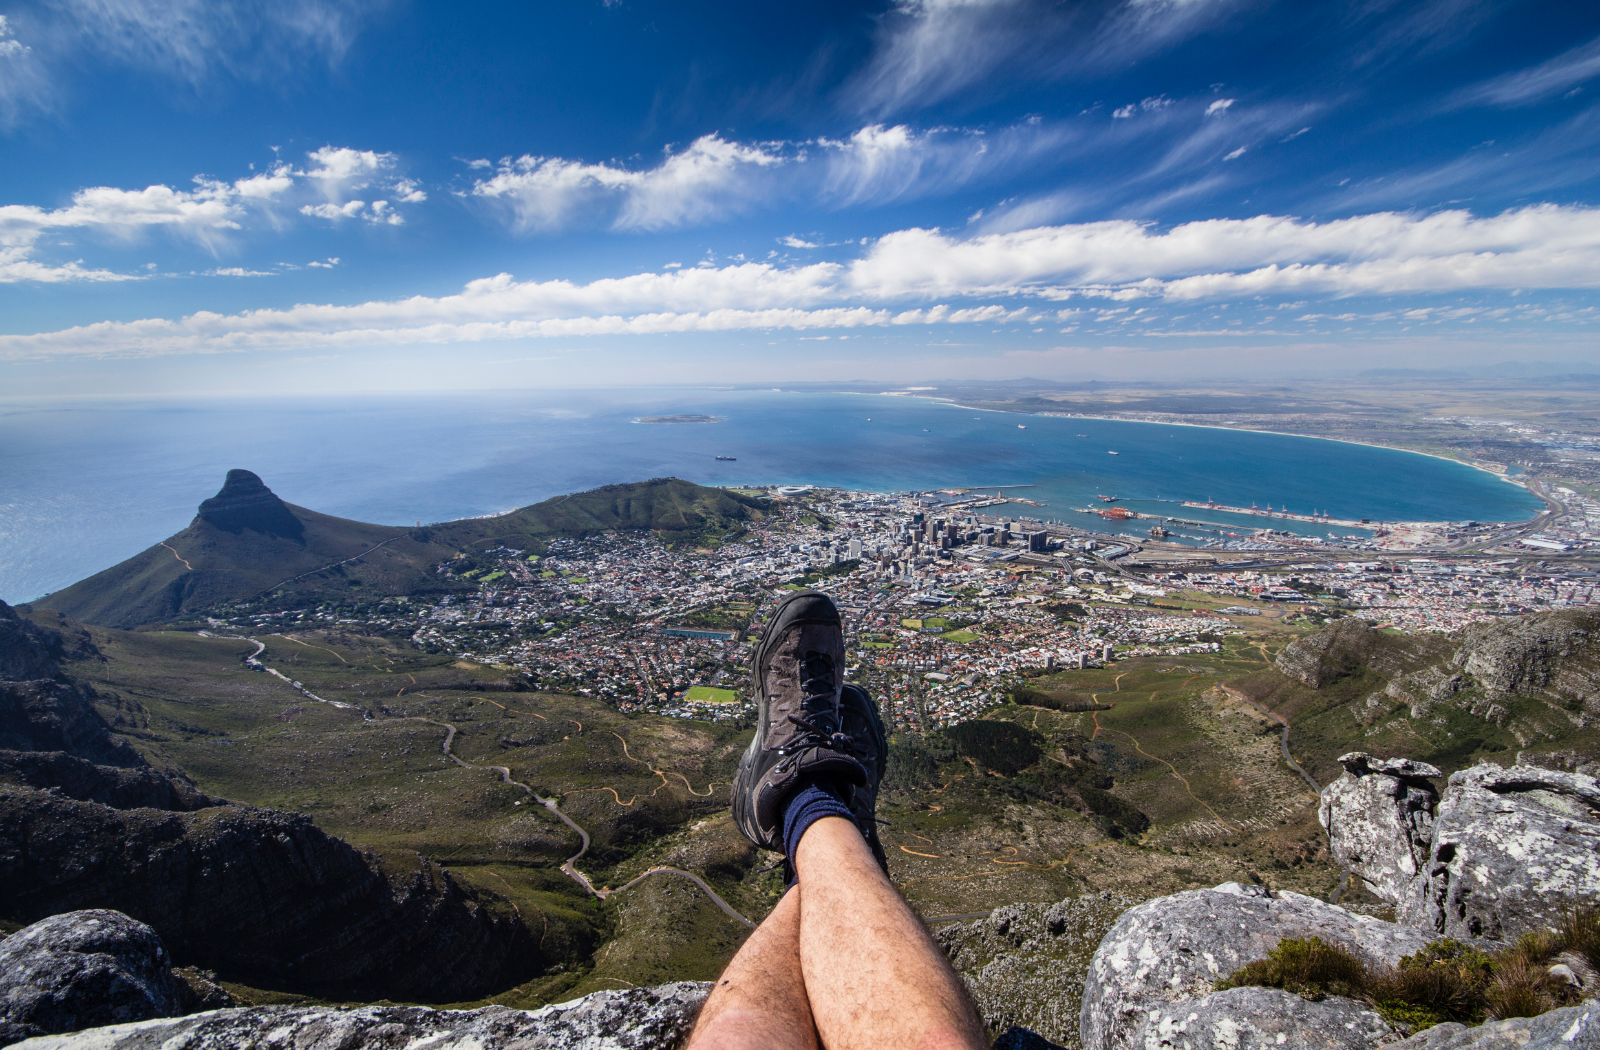 View from South Africa's Table Mountain